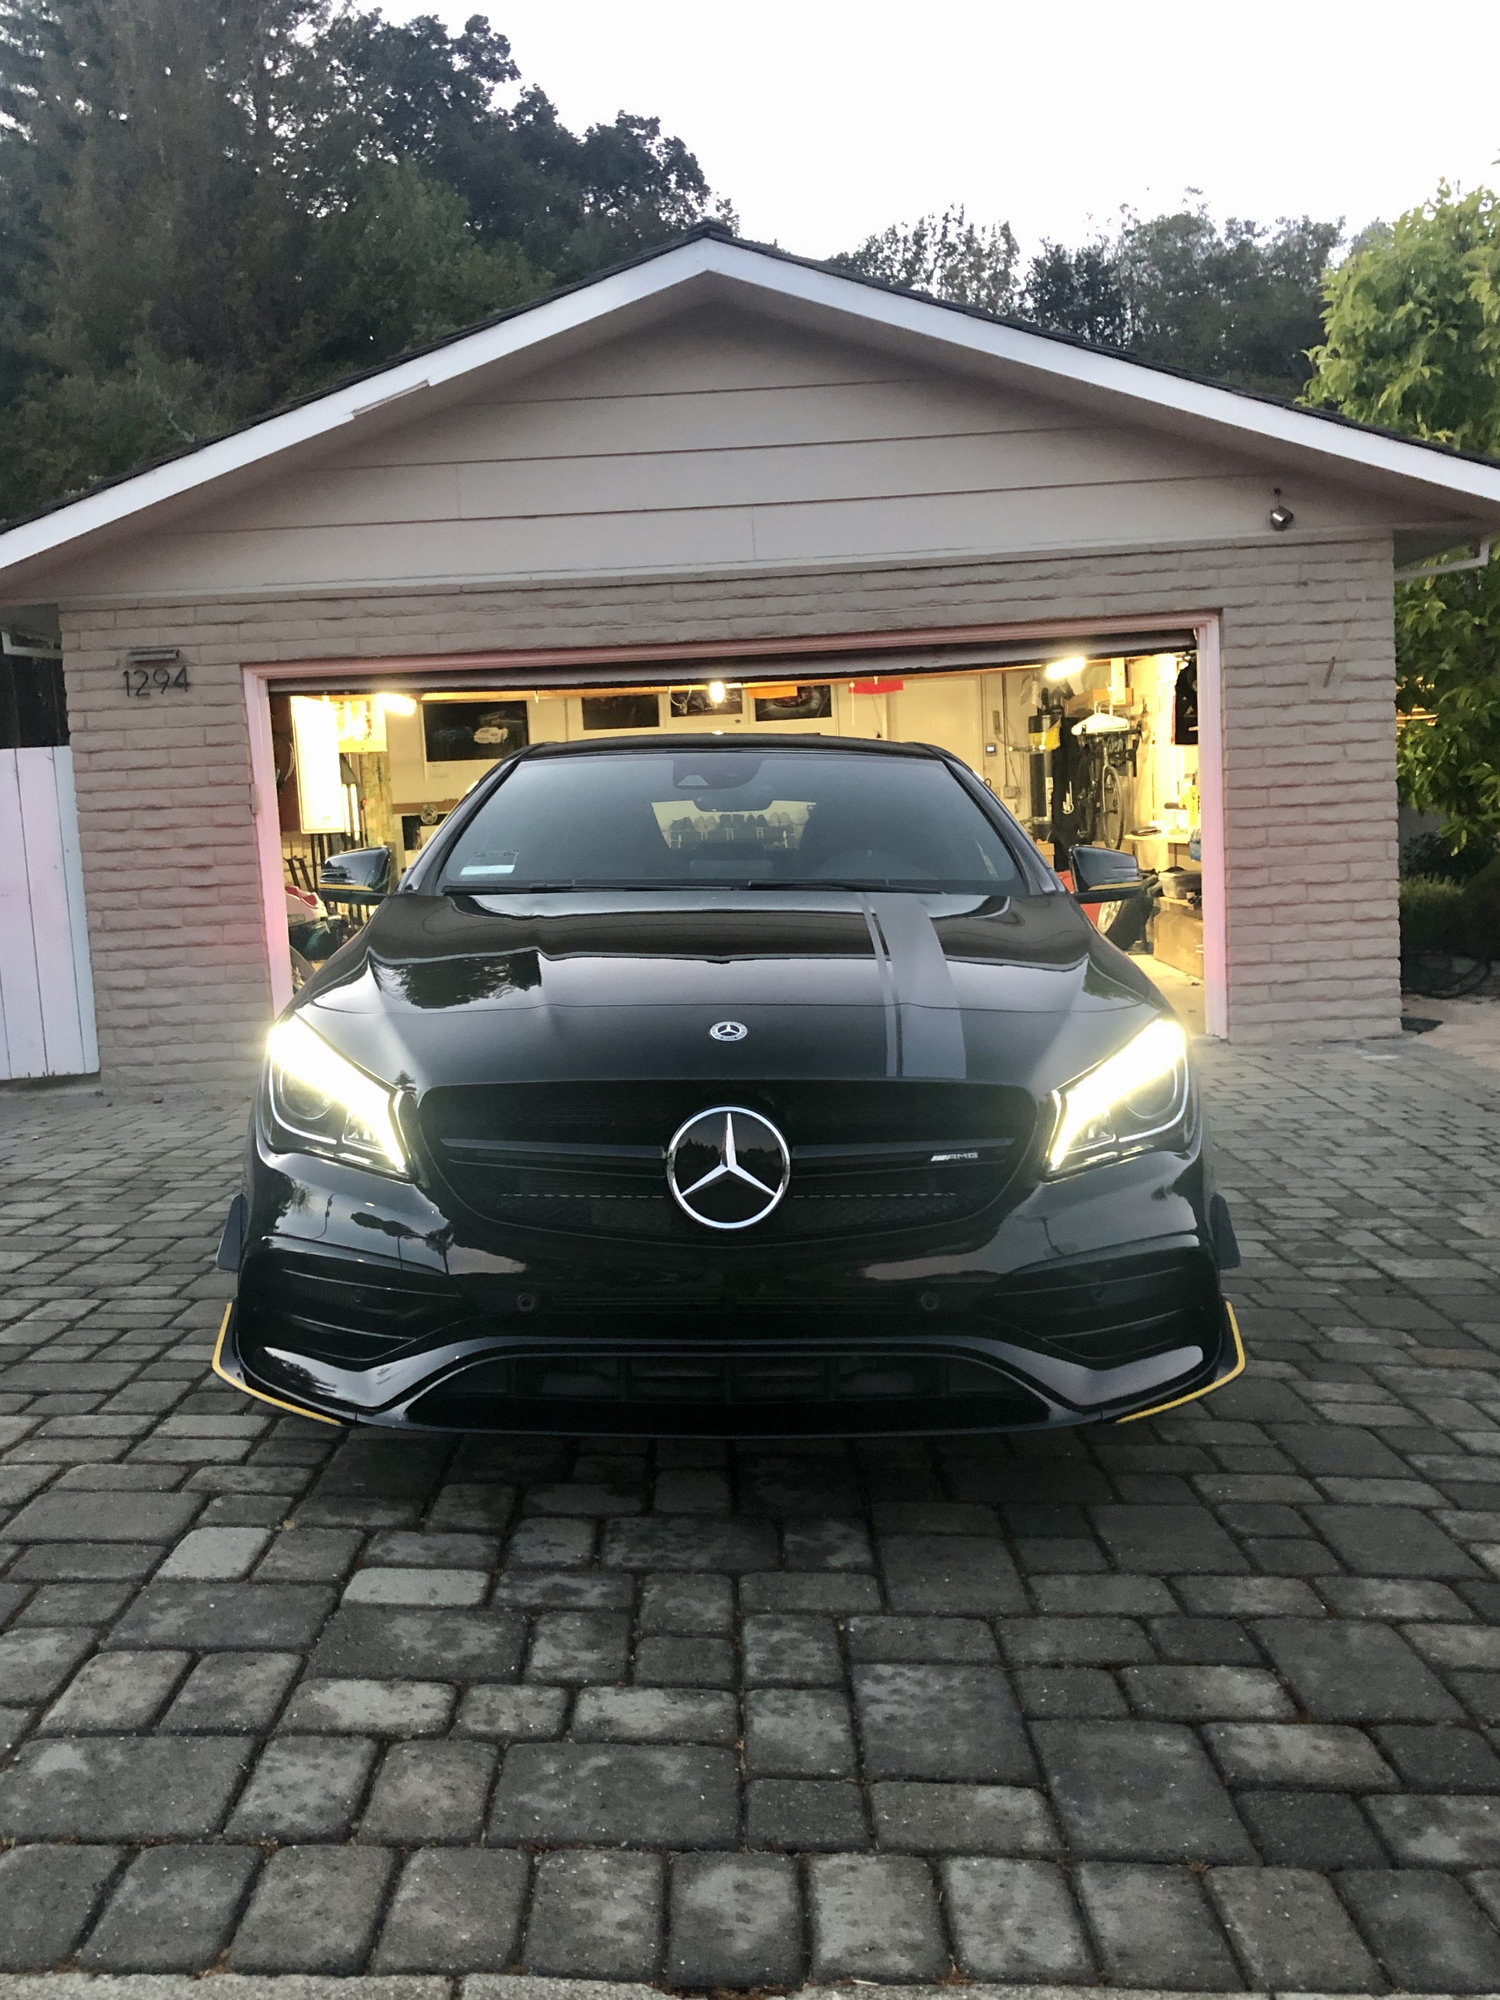 2018 Mercedes-Benz CLA45 AMG - 2018 Mercedes-AMG CLA 45 4MATIC Yellow Night Edition - Used - VIN WDDSJ5CBXJN581145 - 18,300 Miles - 4 cyl - AWD - Automatic - Coupe - Black - San Mateo, CA 94404, United States